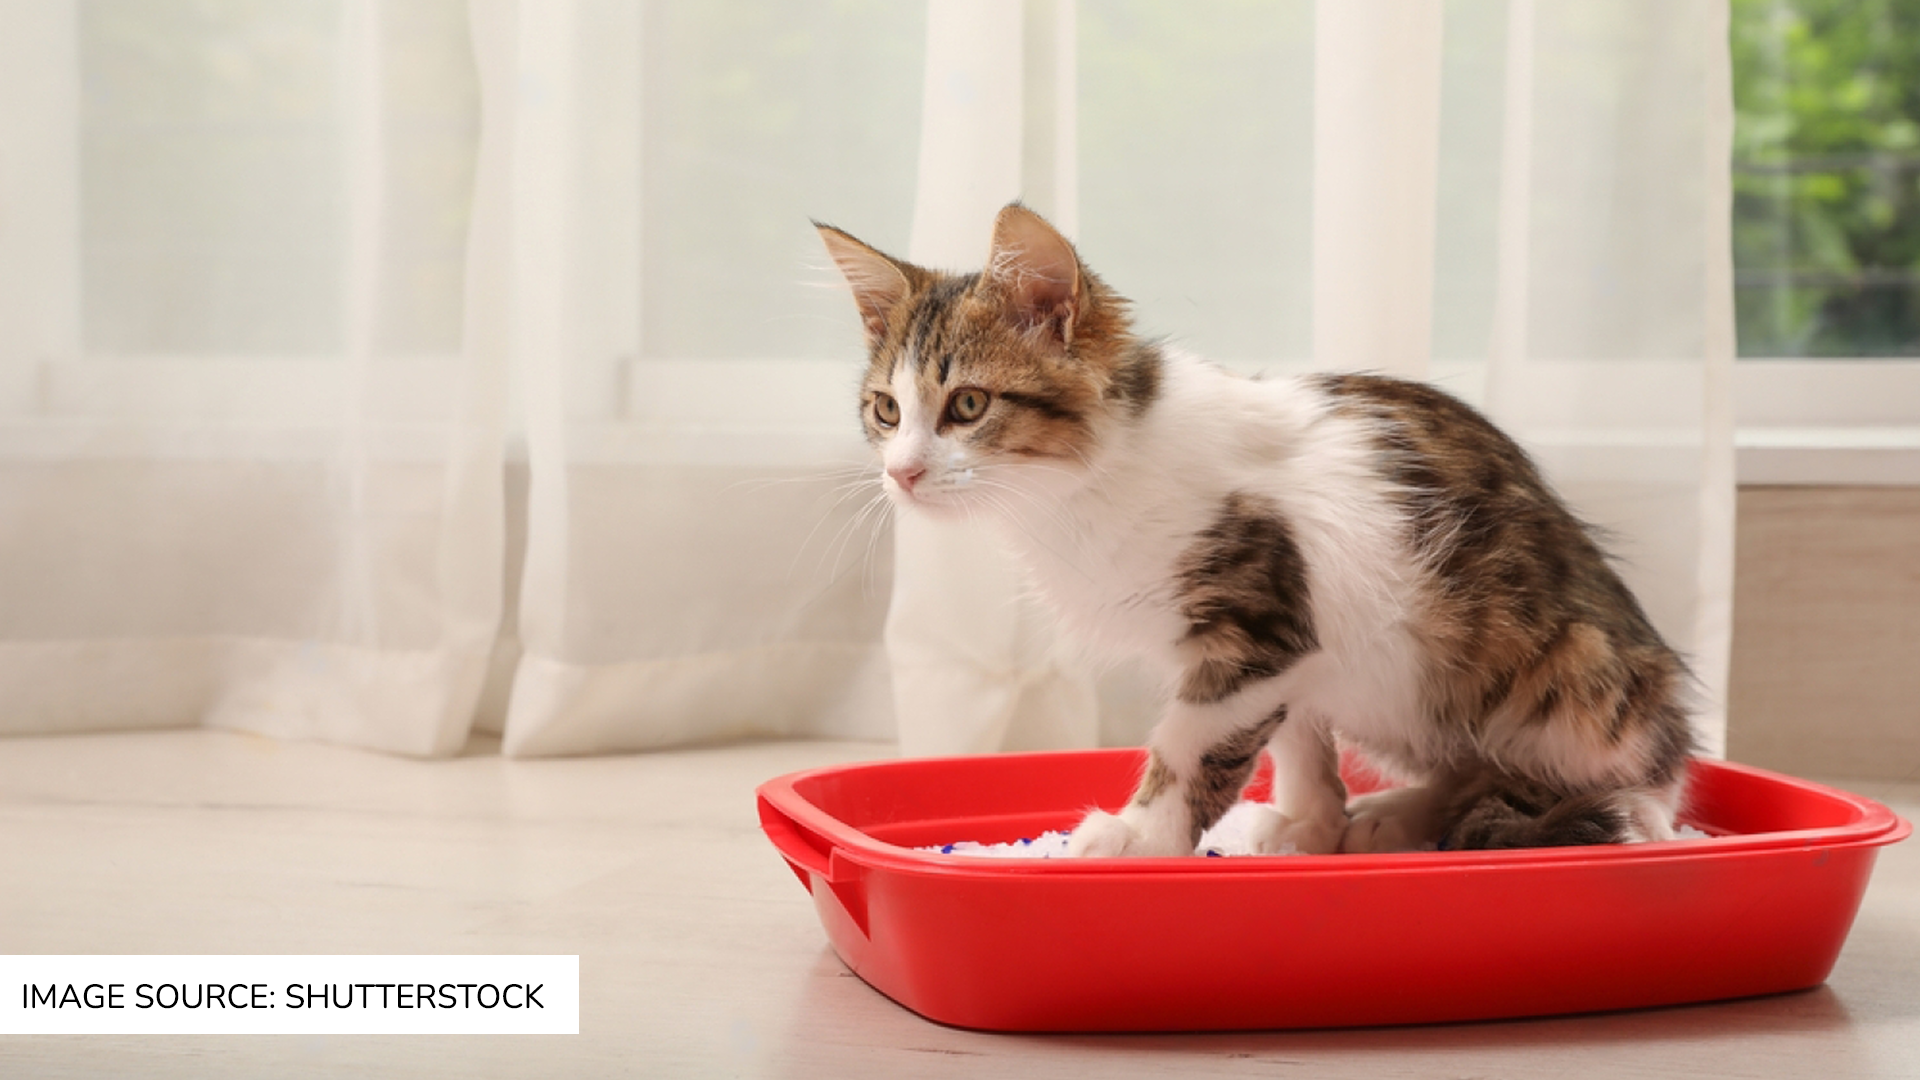 How to get your cat to use the Litterbox